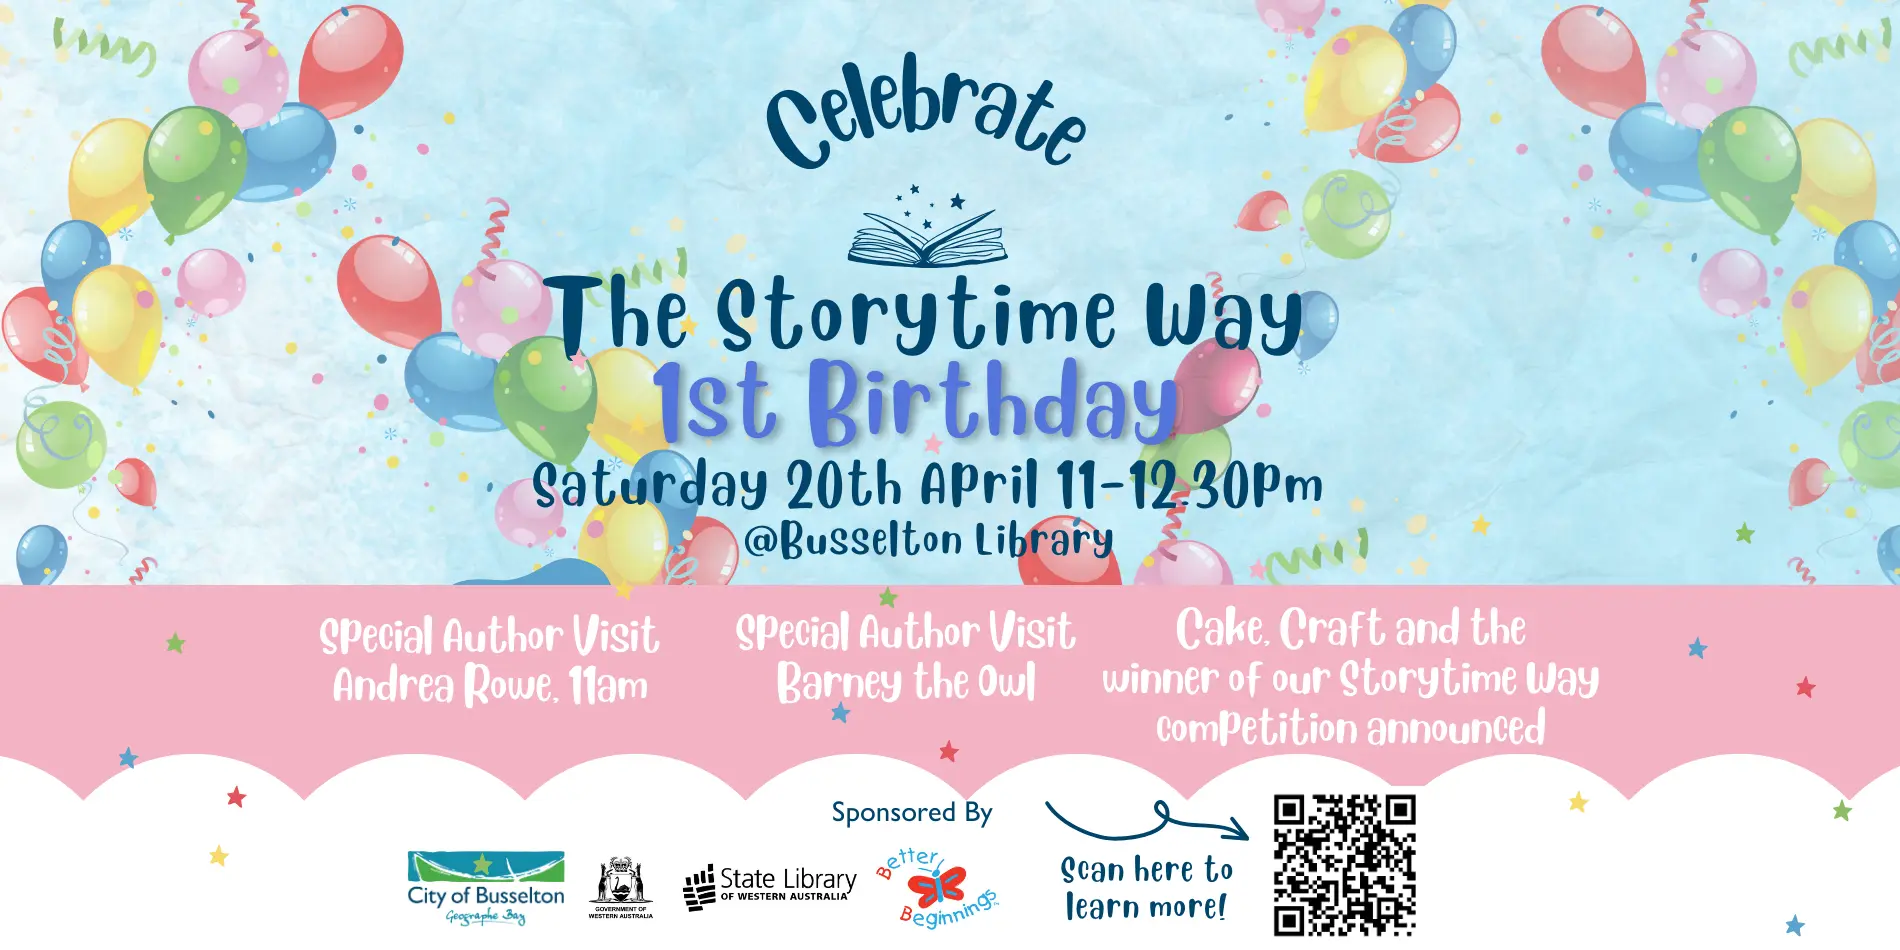 The Storytime Way 1st Birthday at Busselton Library 20th of April from 11am to 12:30pm.